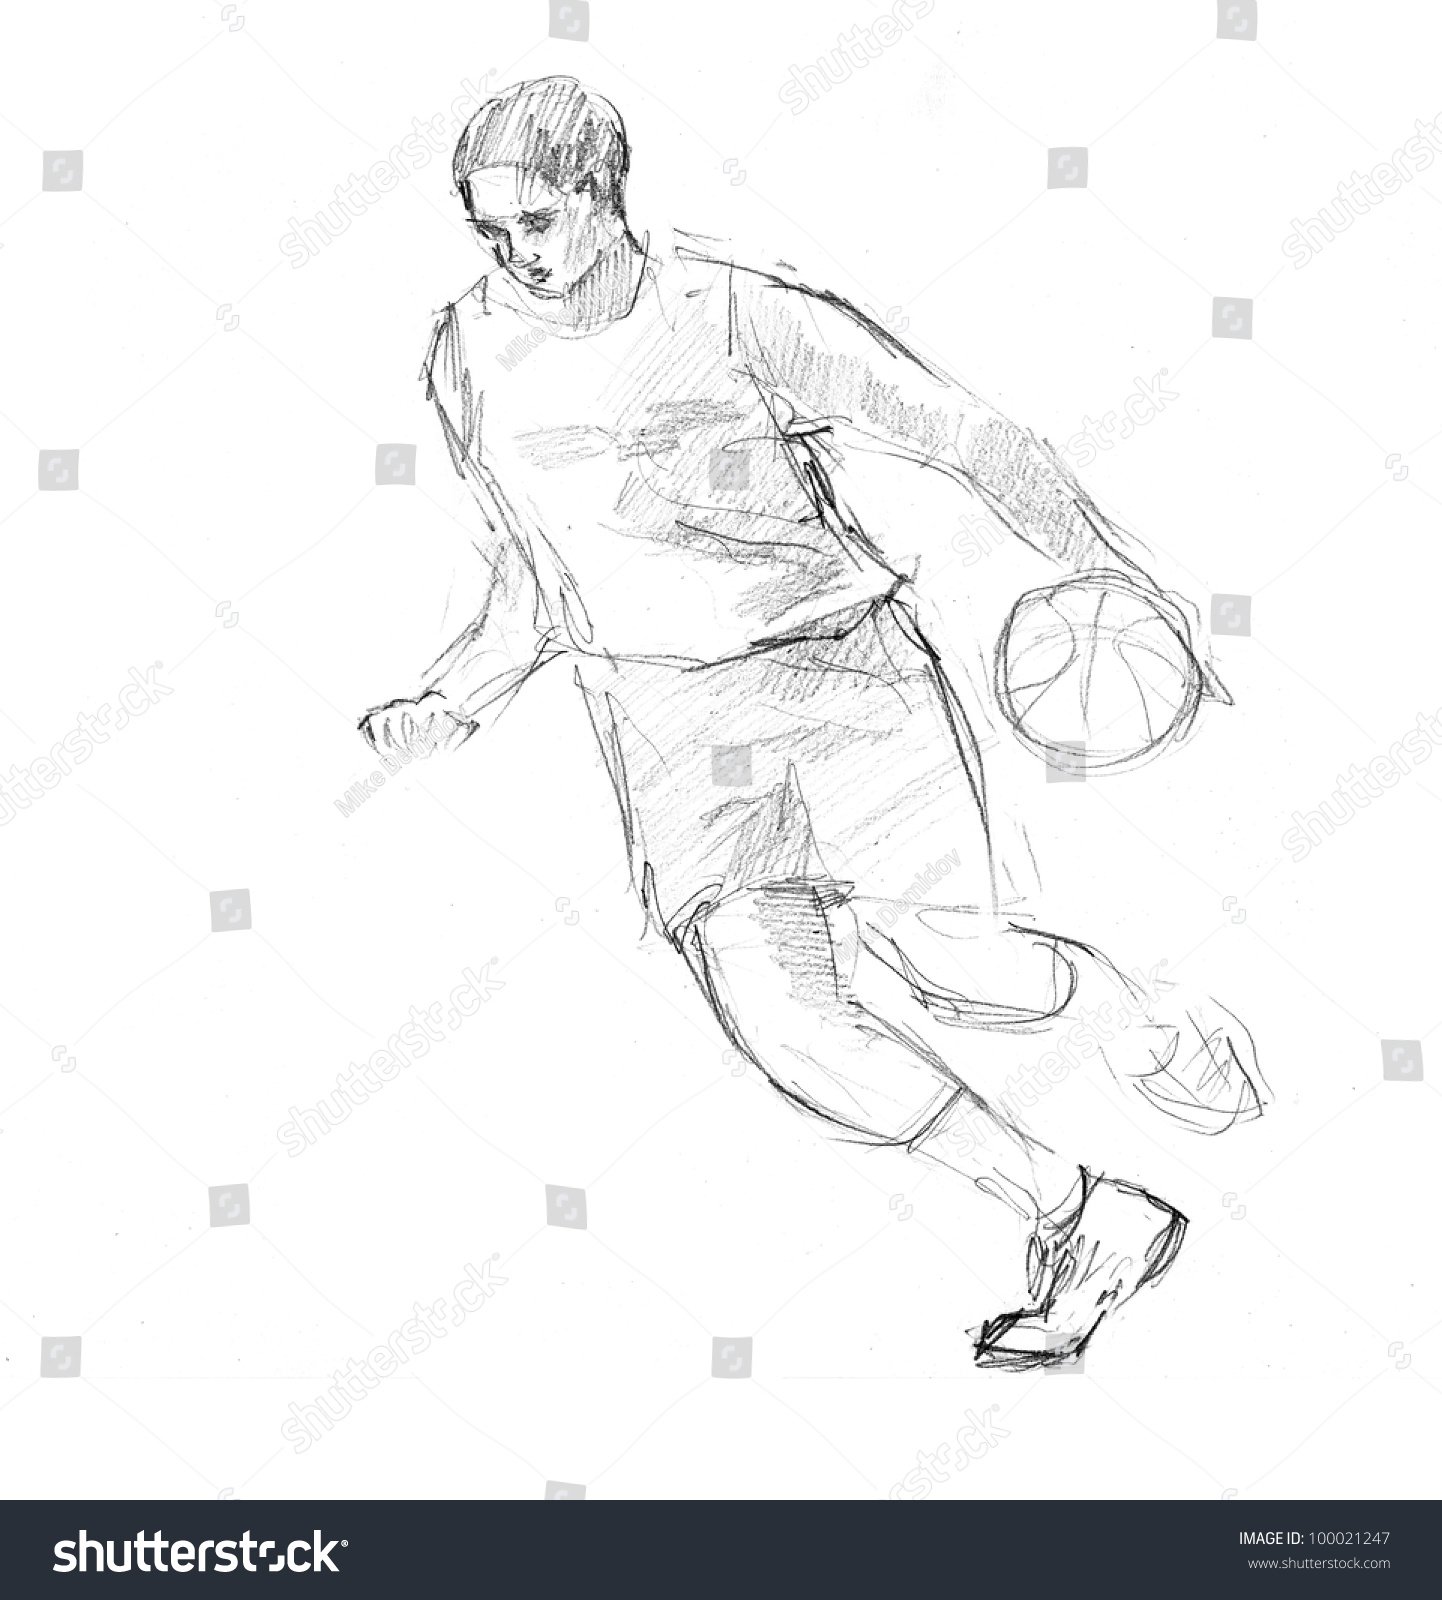 Basketball Player Sketch at PaintingValley.com | Explore collection of ...